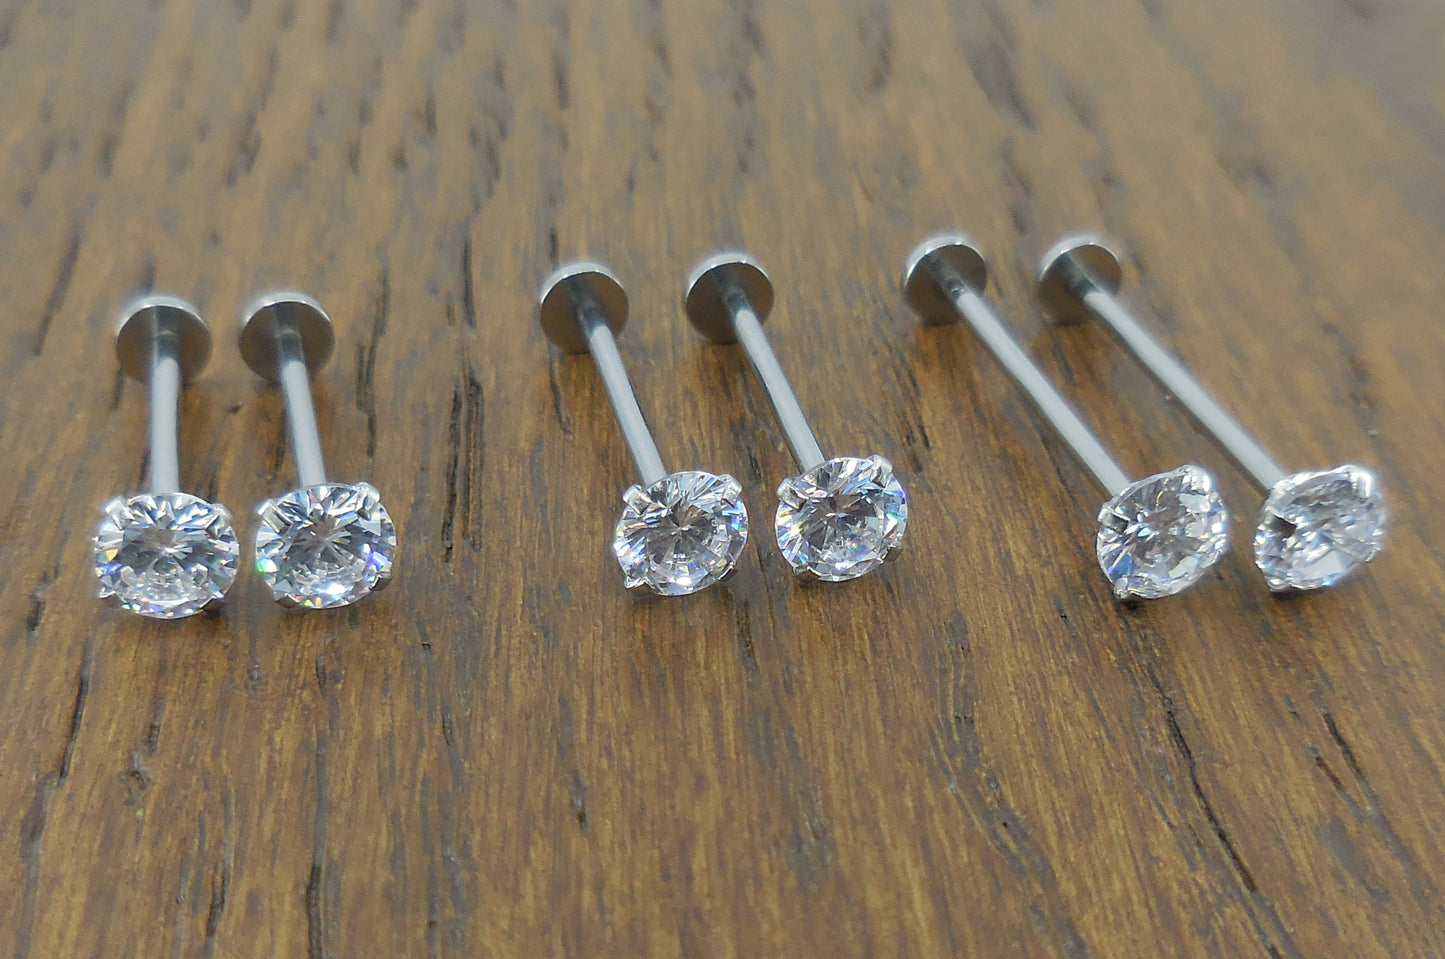 Cheek Piercings Pair Dimple Maker Prong Set 5mm Clear Crystal CZ 16G 14mm, 16mm, 19mm Surgical Stainless Steel Internally Threaded Rings